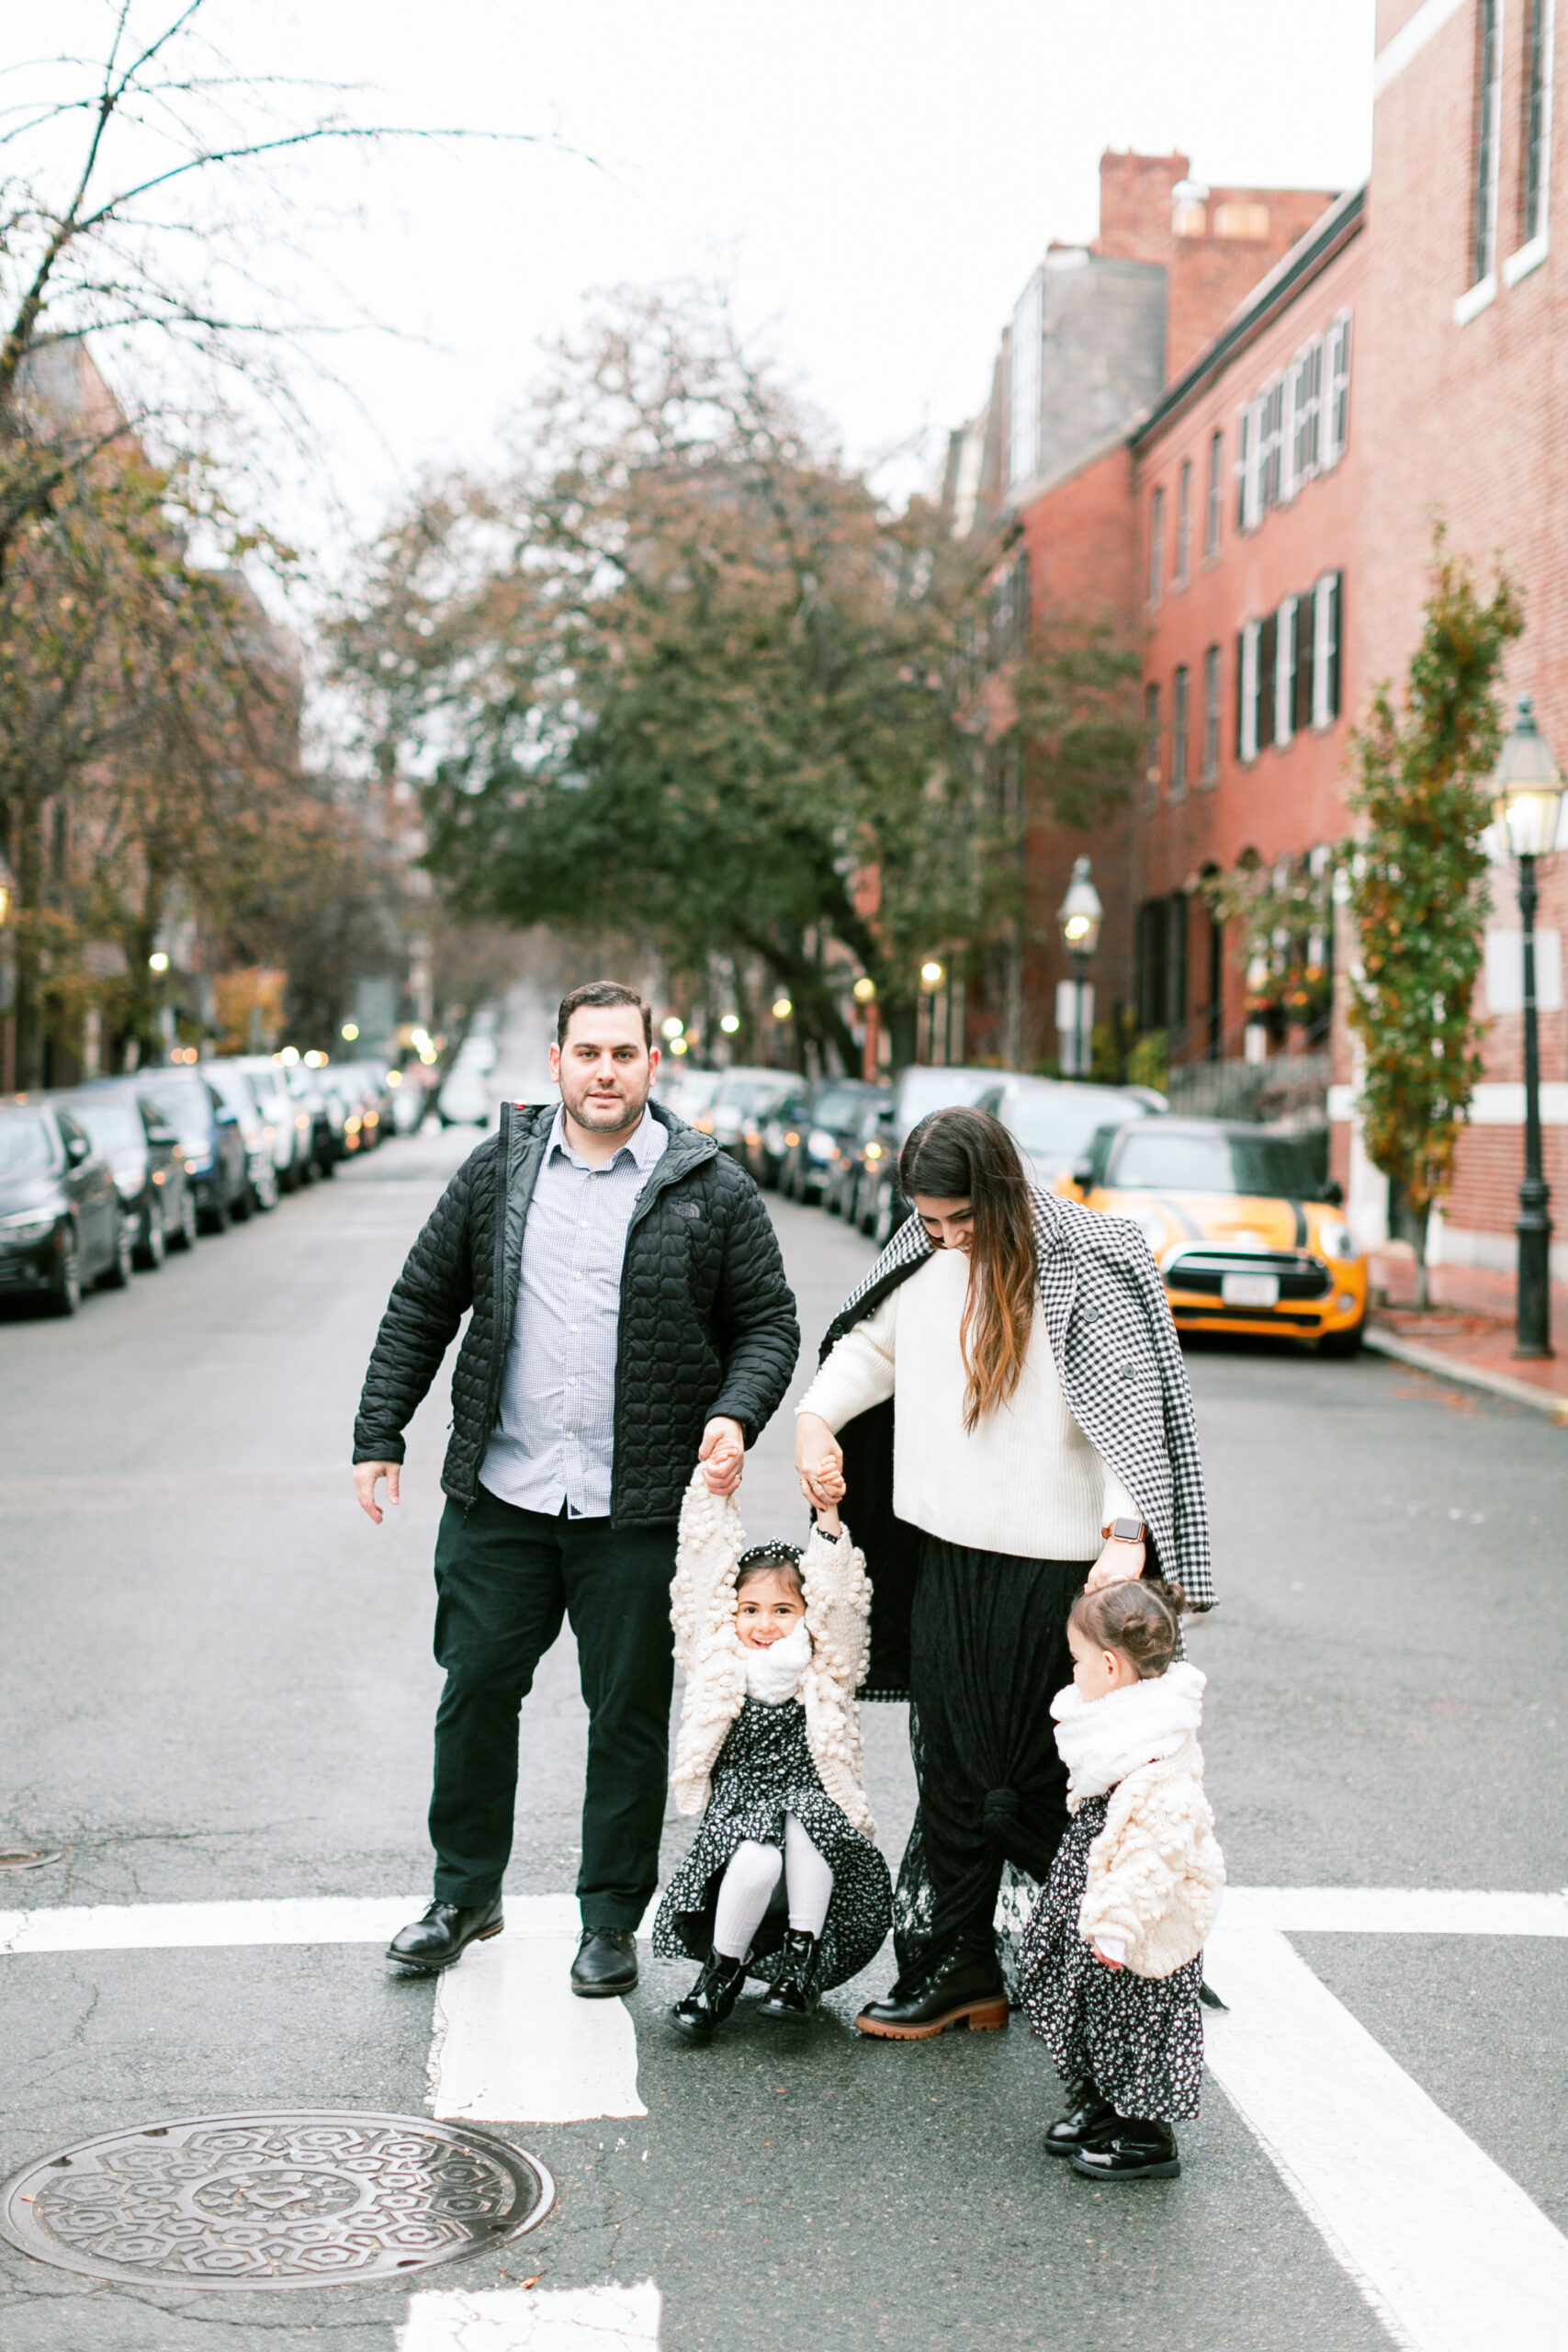 Our annual family photos are here! Plus, I'm sharing a look at our holiday cards, and a million good reasons to take those family photos. | glitterinc.com | @glitterinc